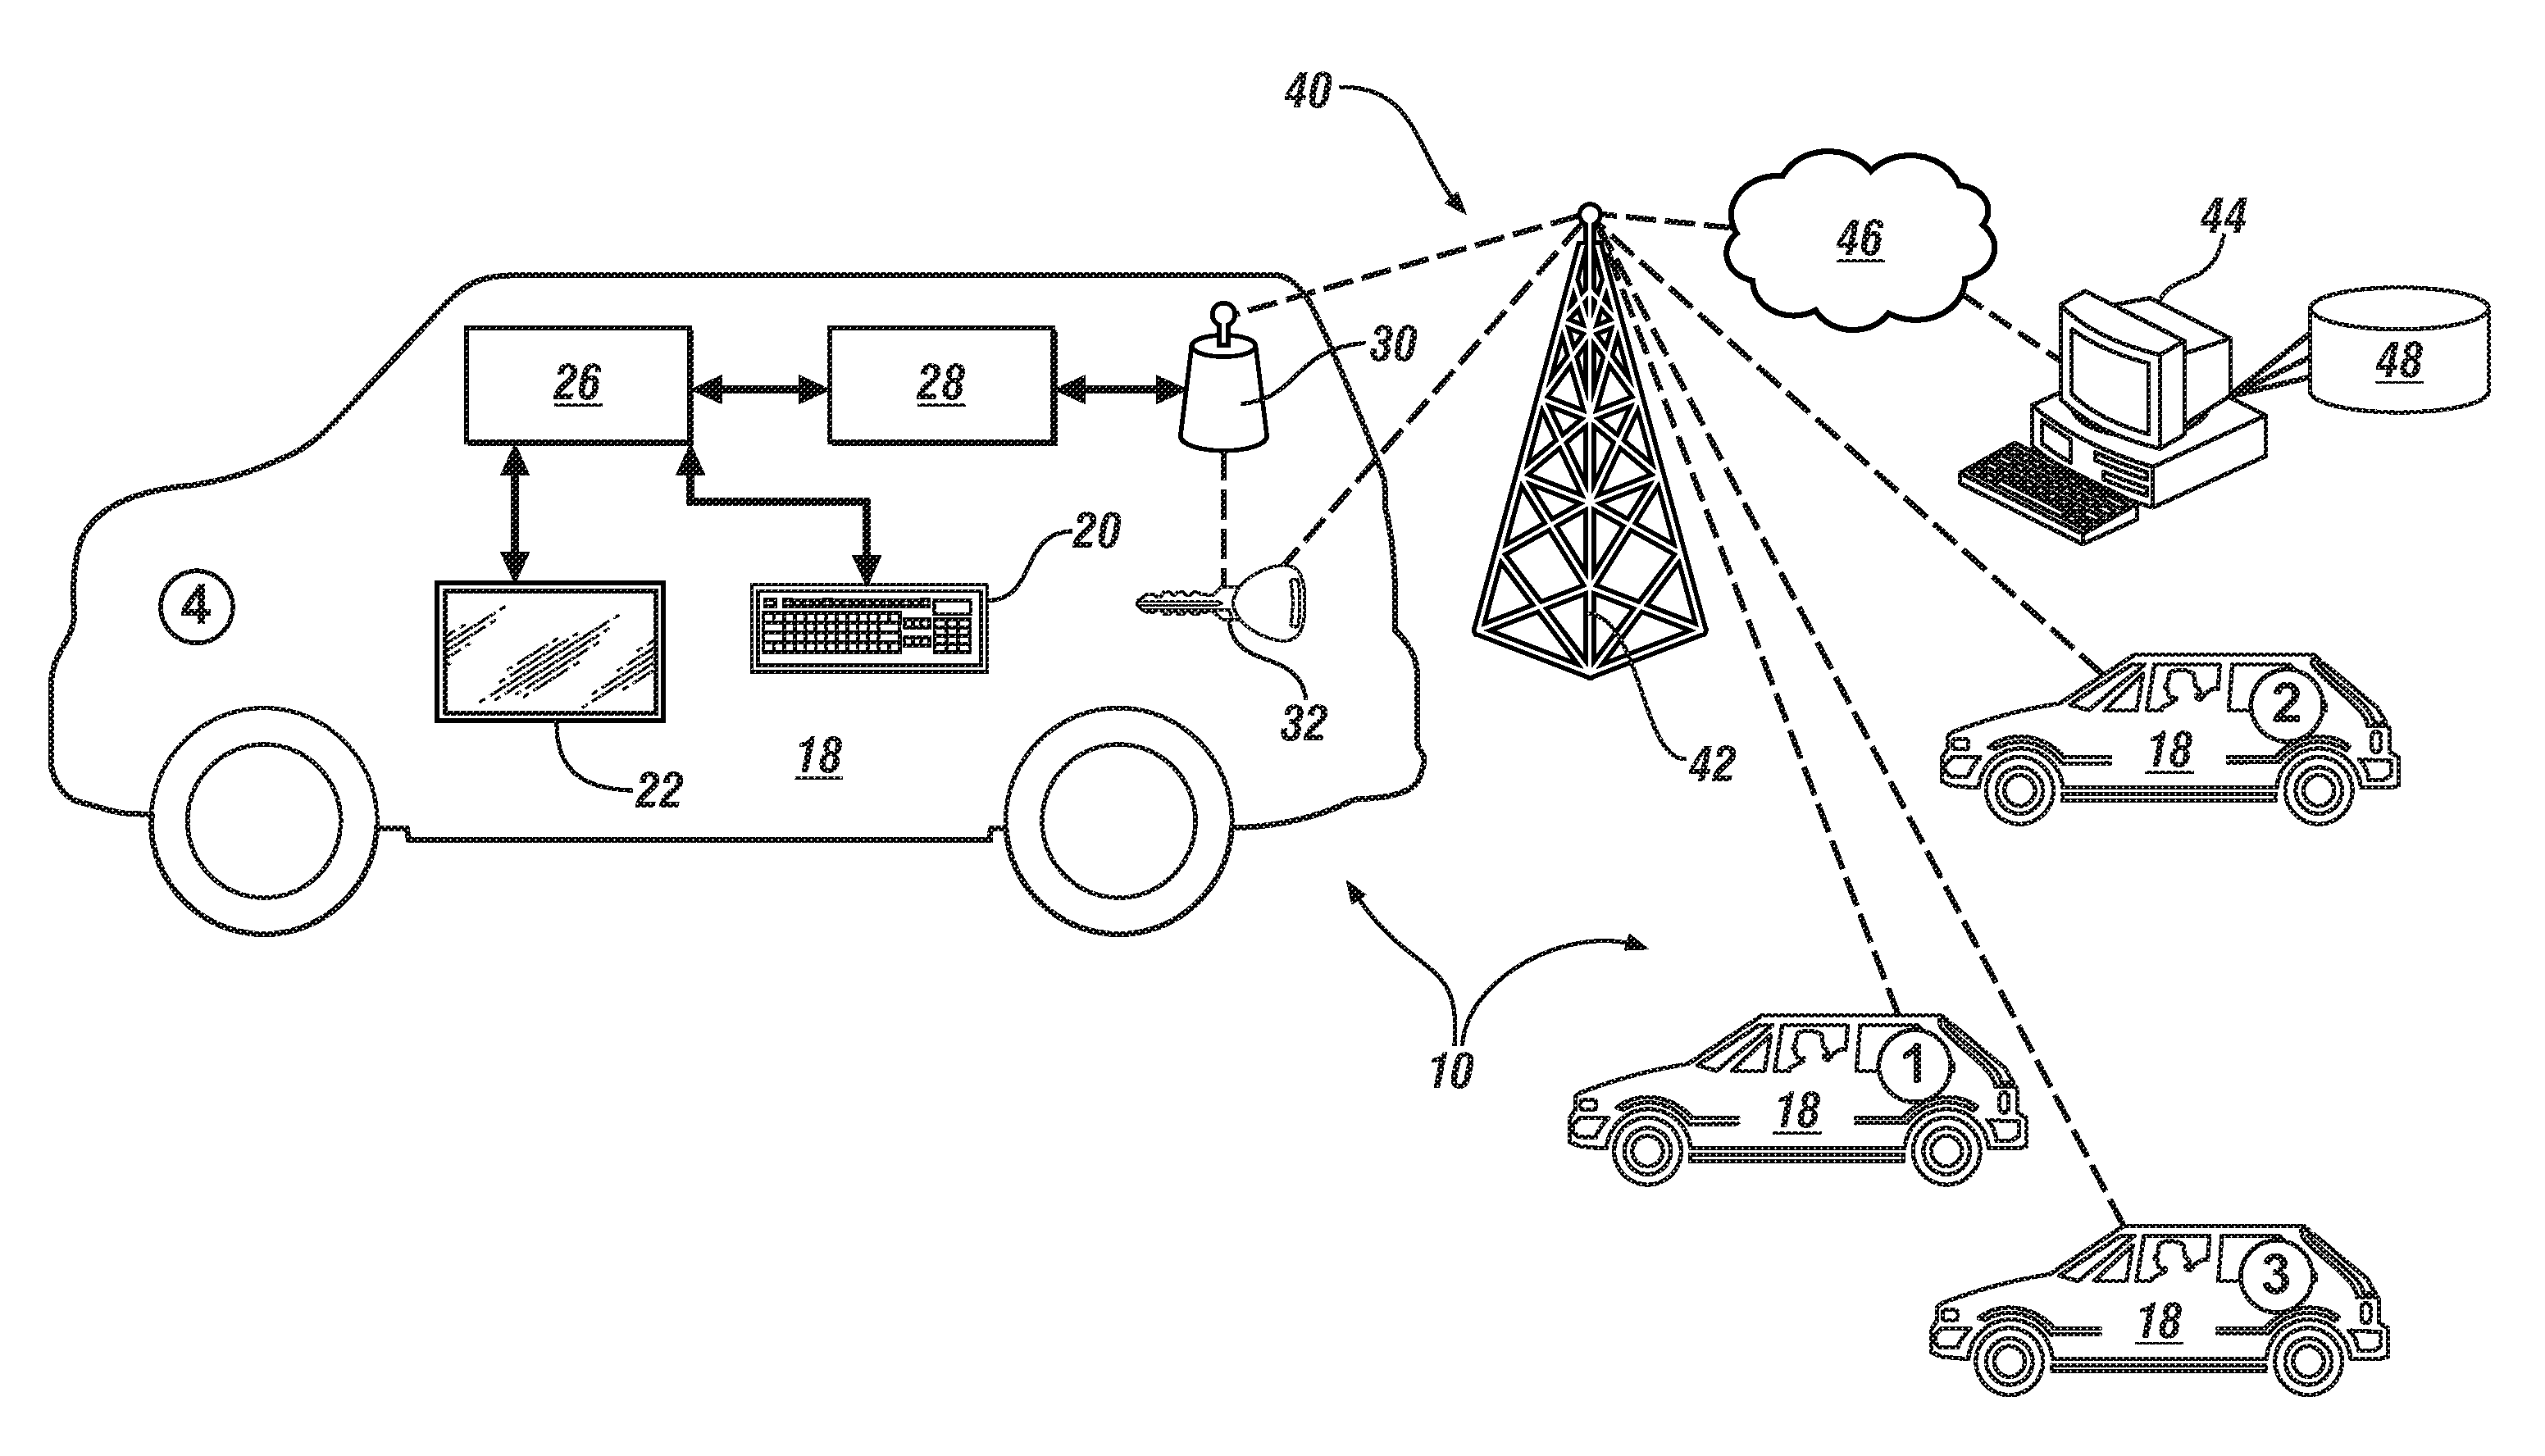 Remotely located database for managing a vehicle fleet